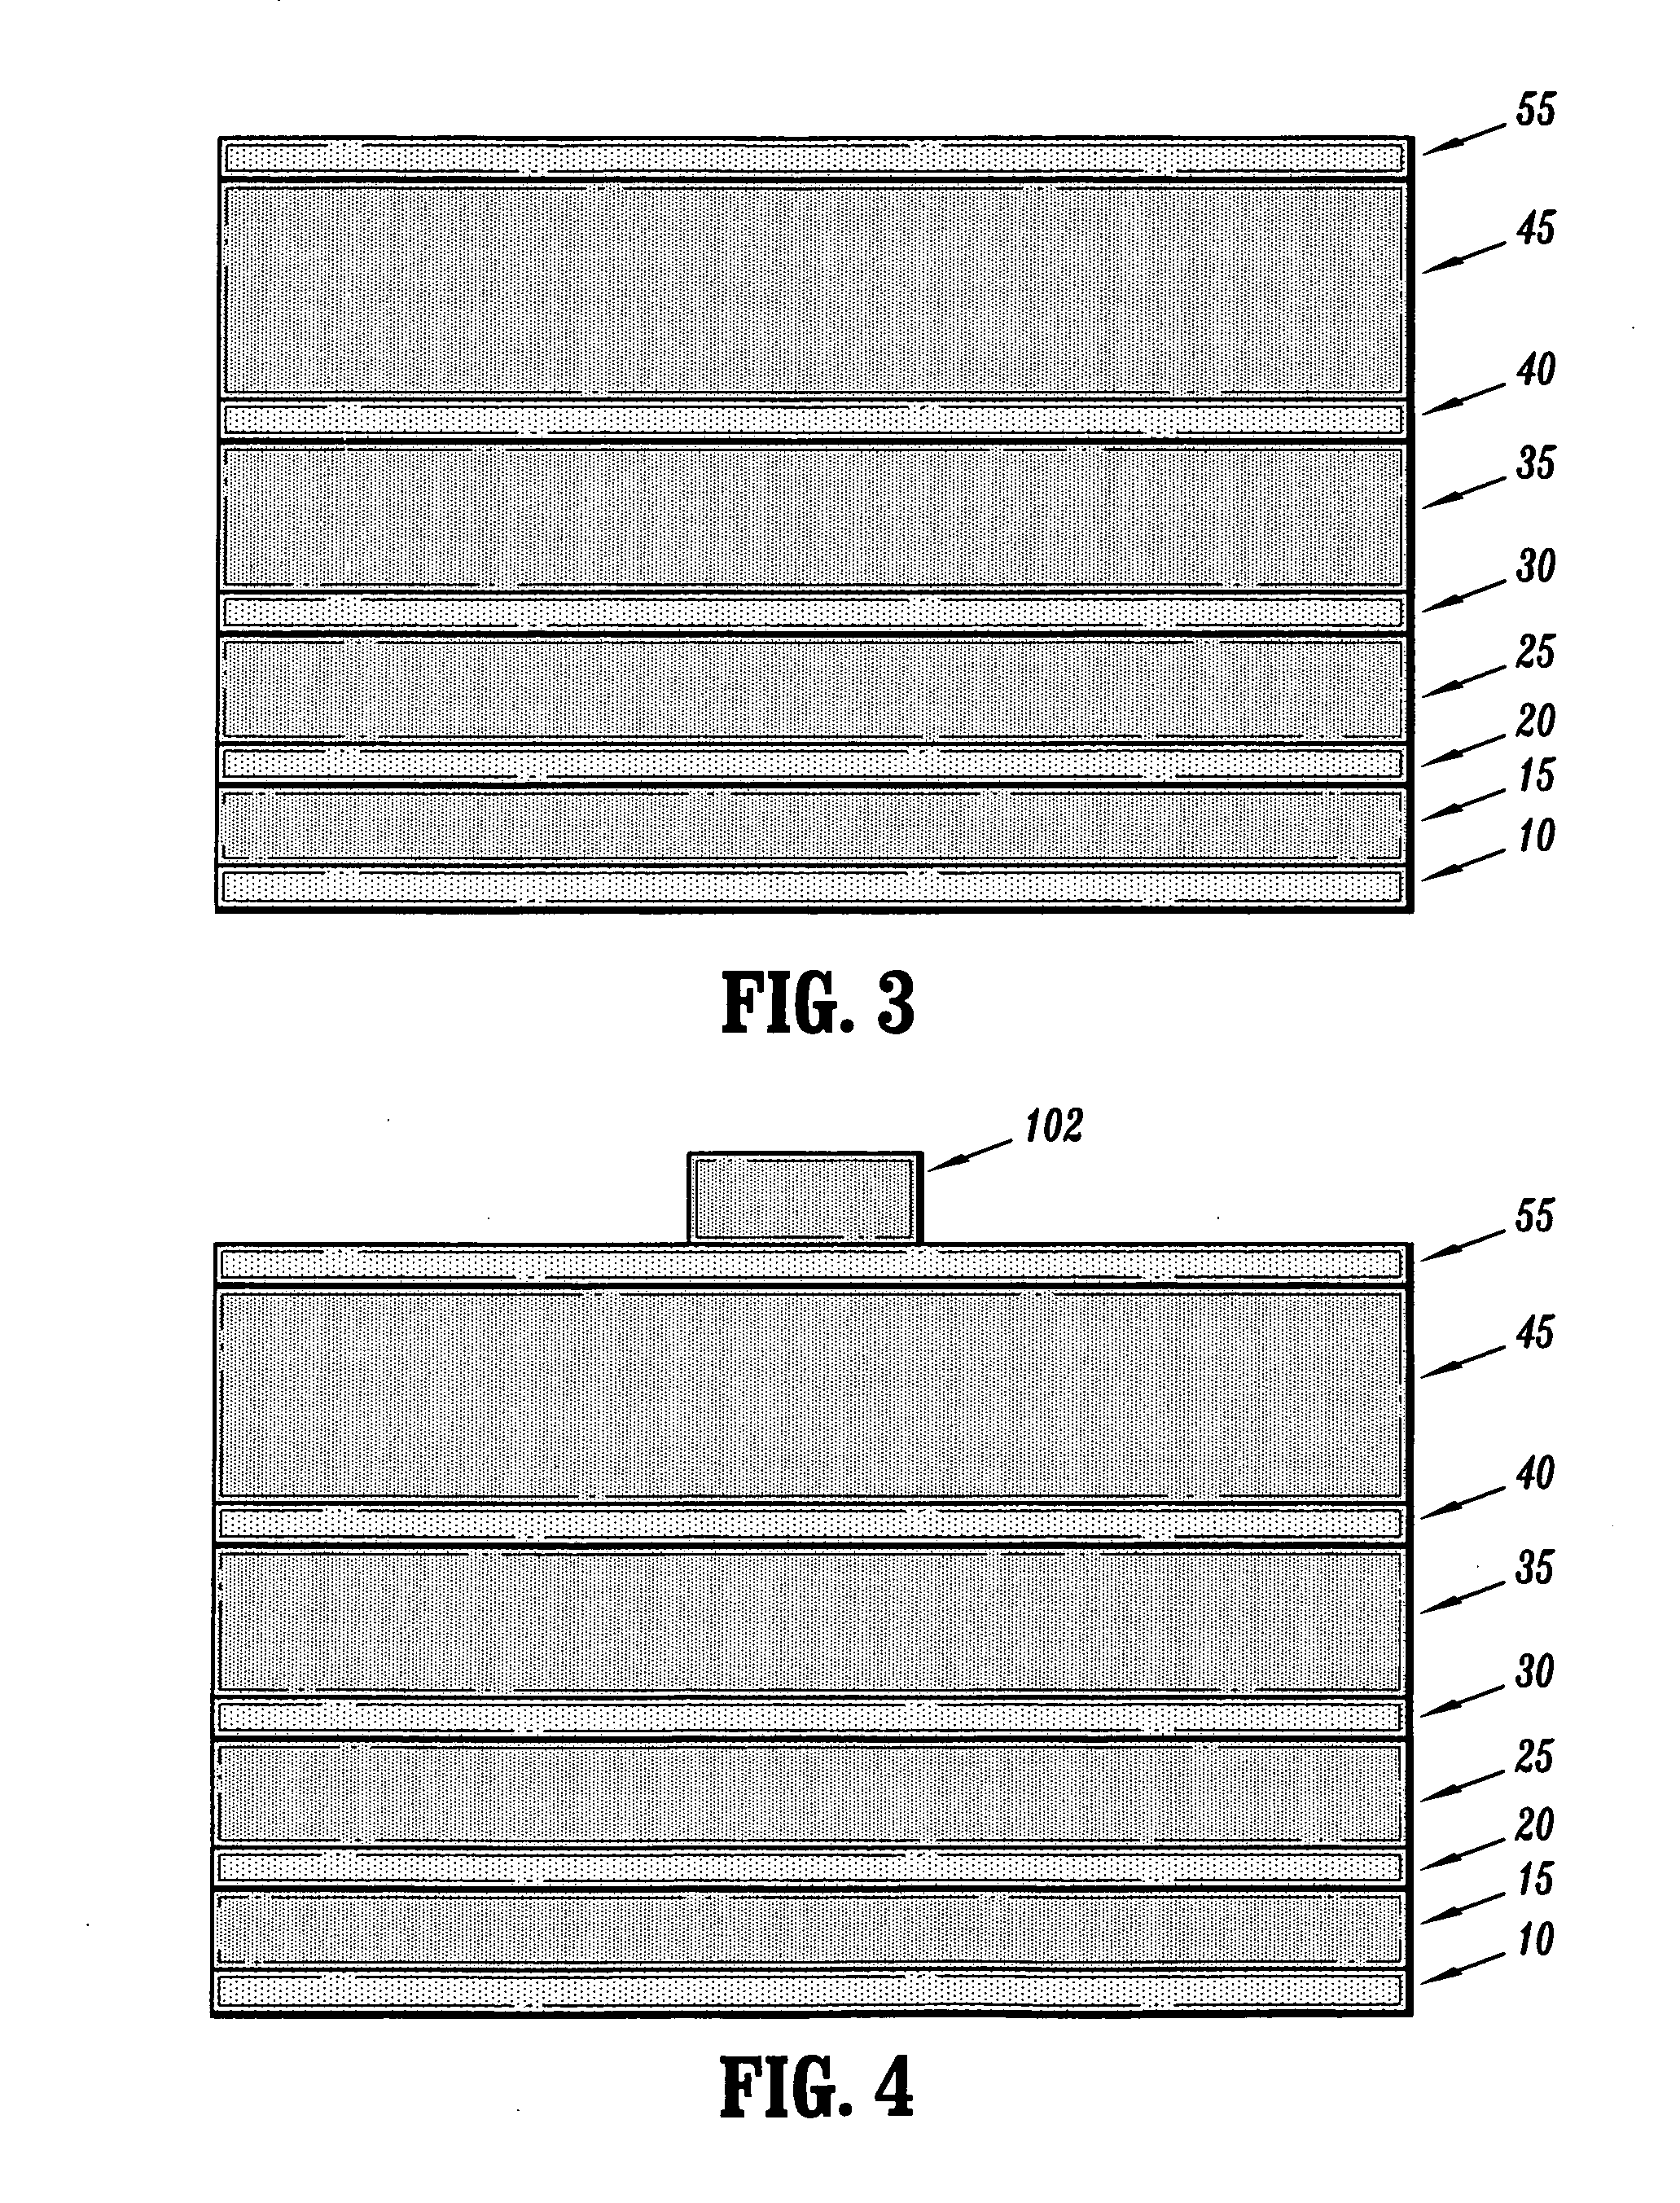 Multi-bit phase change memory cell and multi-bit phase change memory including the same, method of forming a multi-bit phase change memory, and method of programming a multi-bit phase change memory